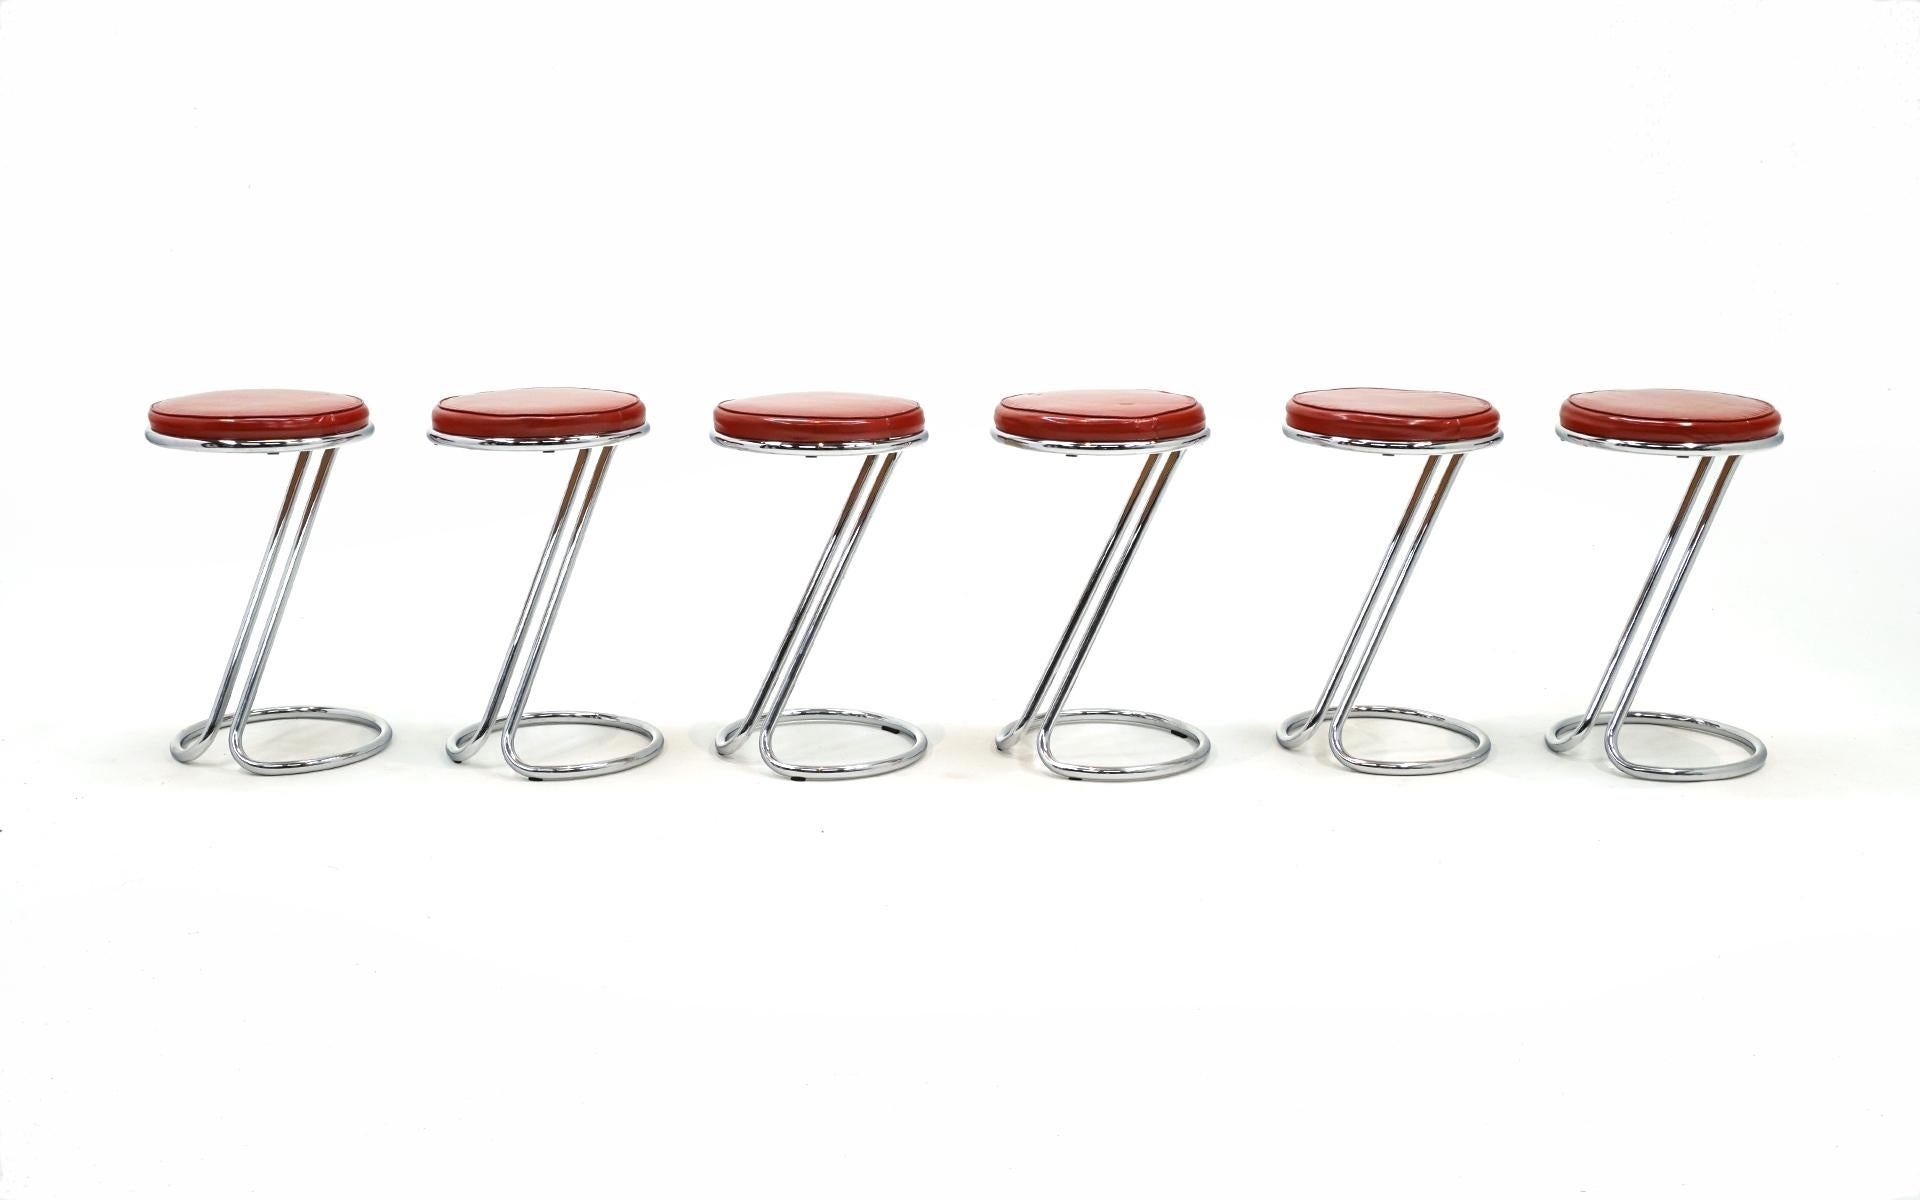 Rare set of 6 counter height Z barstools designed by Gilbert Rohde for the Troy Sunshade Company, 1930s. The tubular chrome frames are in amazingly good condition with NO RUST and no pitting. We've been in business for 25 years and have never seen a